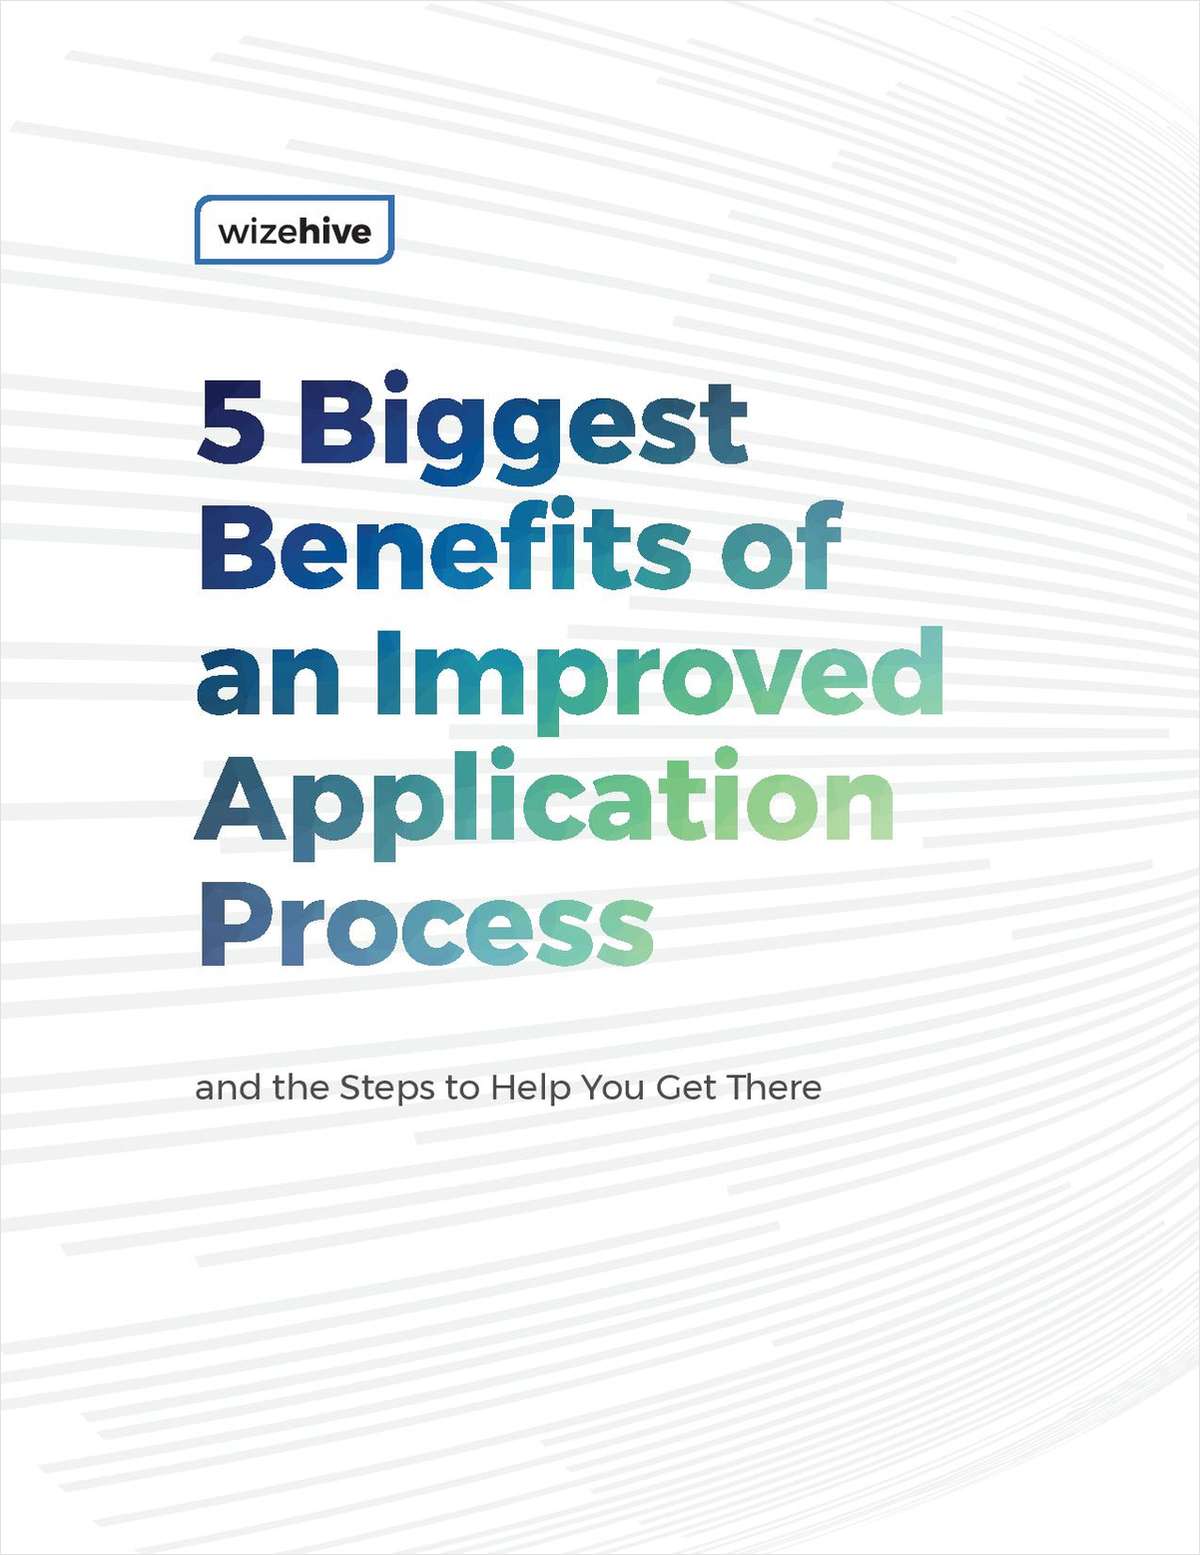 5 Biggest Benefits of an Improved Application Process